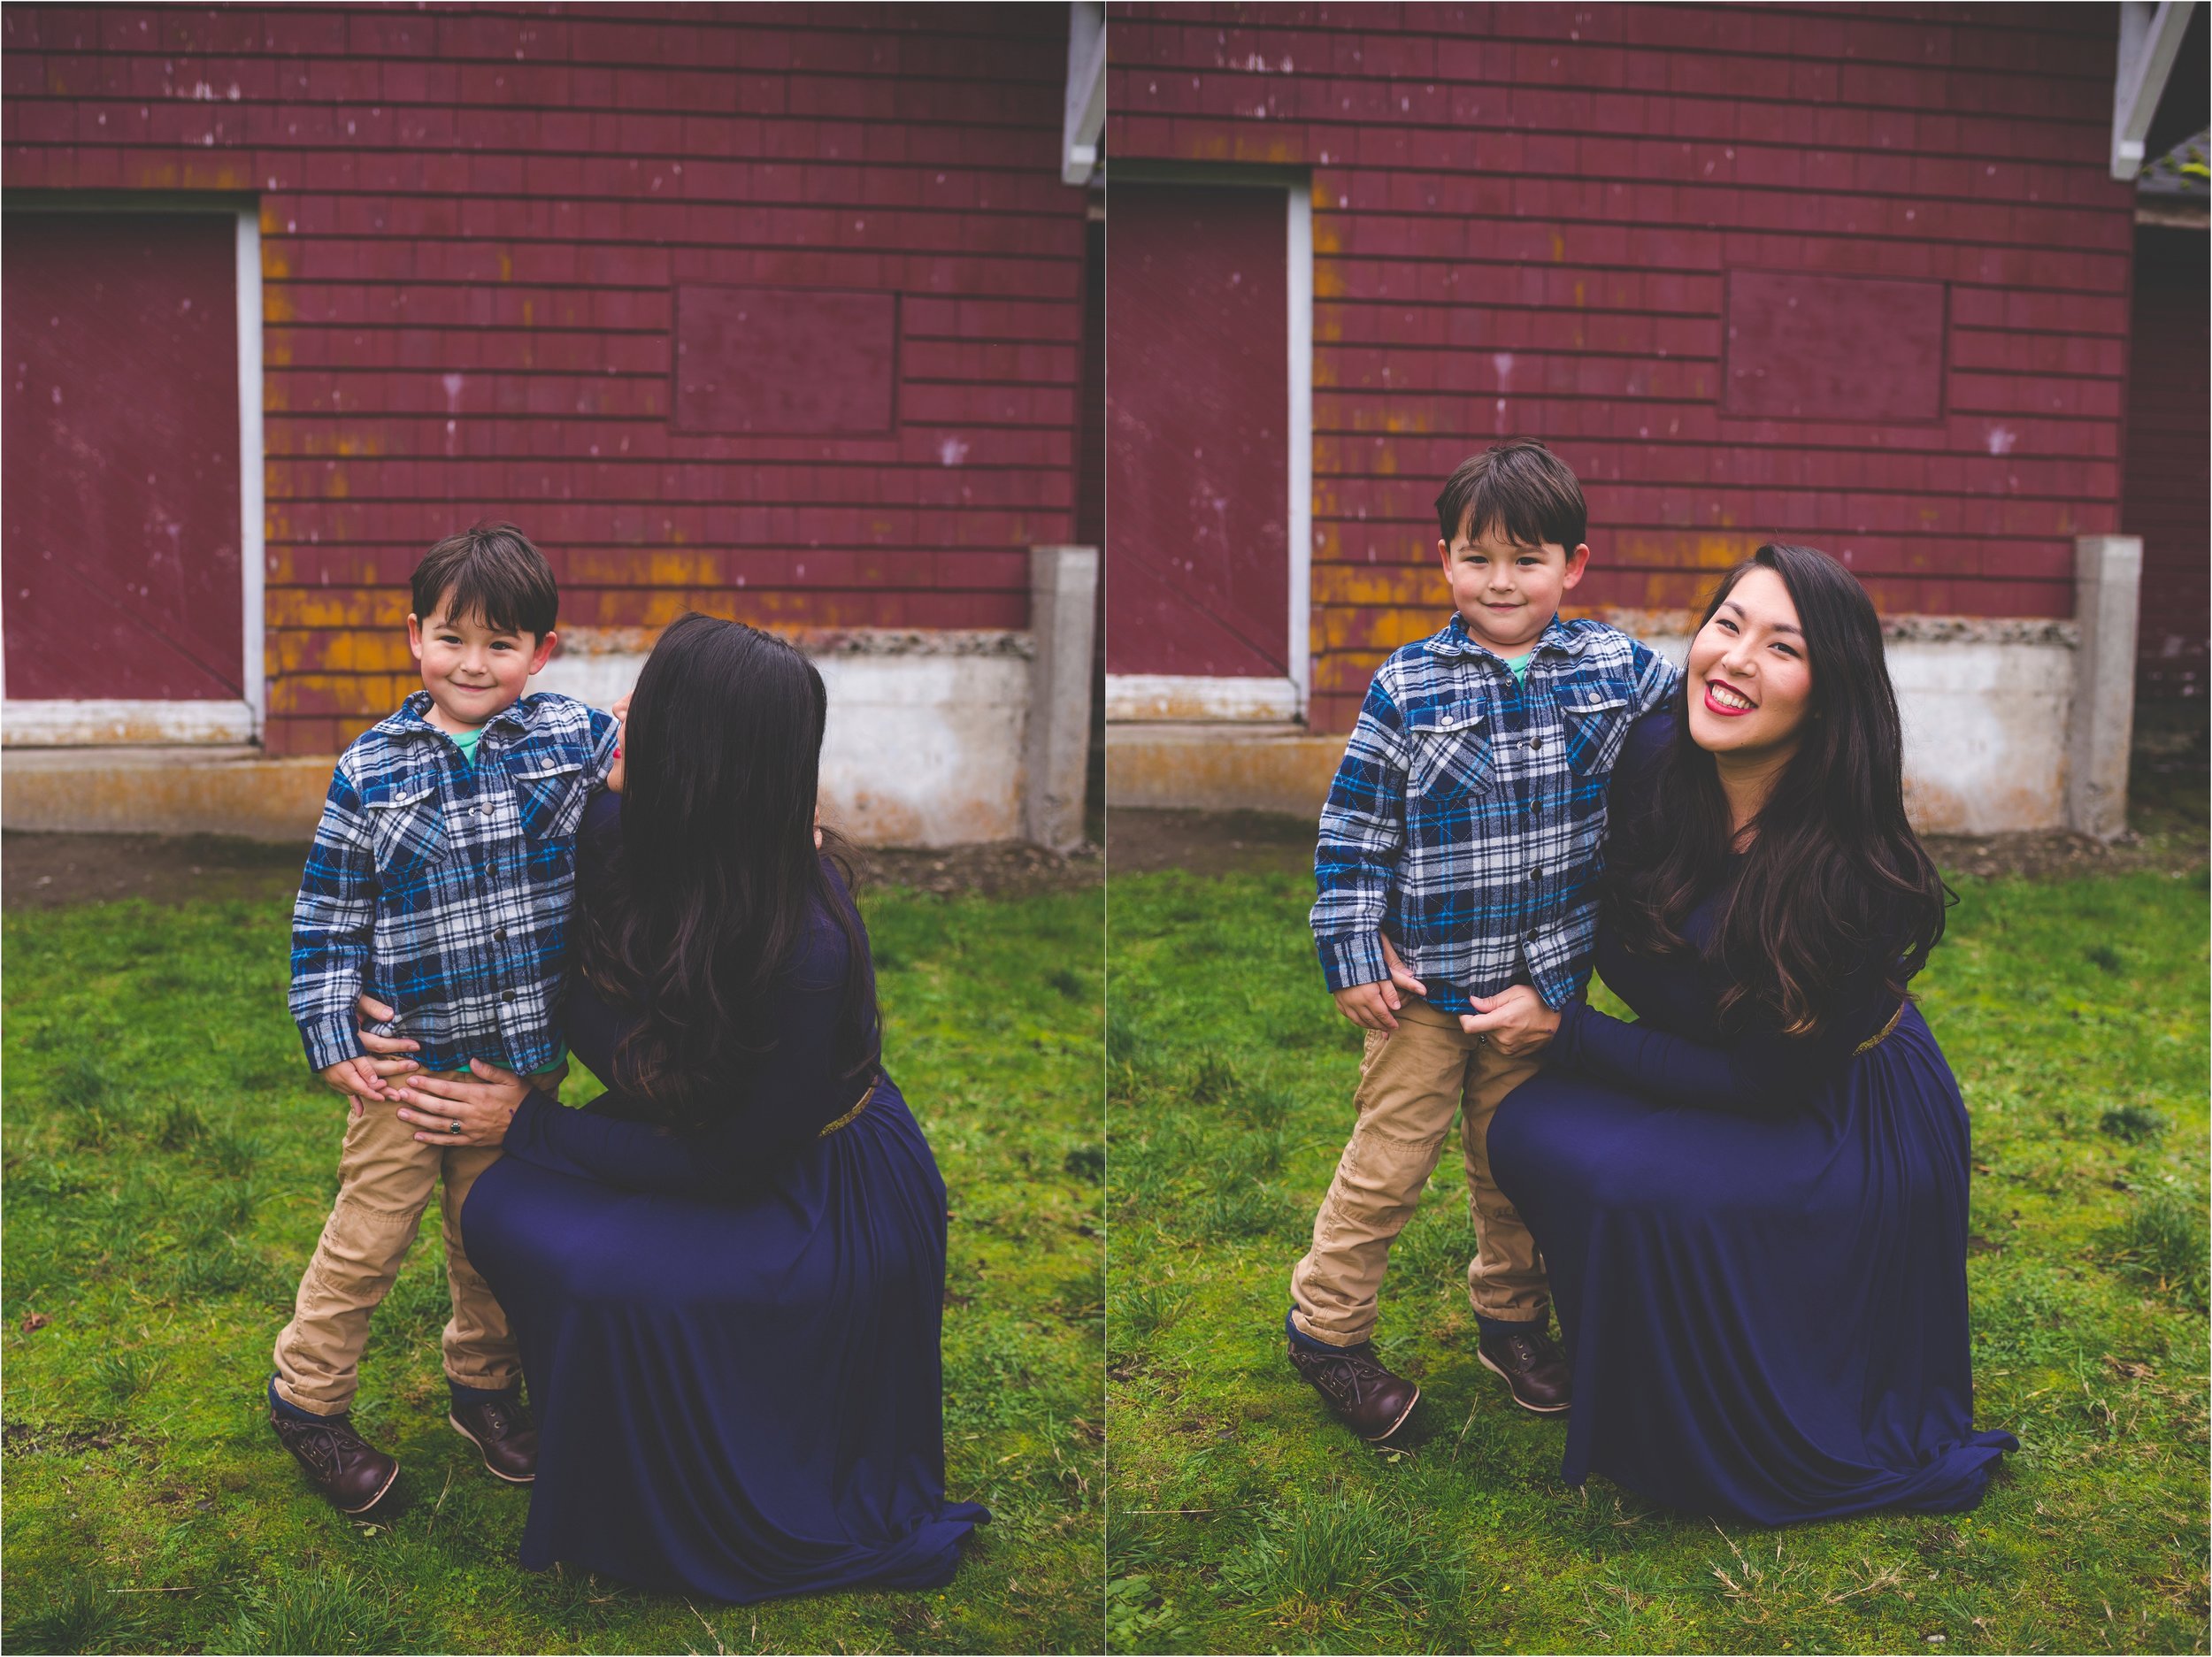 fort-steilacoom-park-family-session-jannicka-mayte-pacific-northwest-lifestyle-photographer_0013.jpg